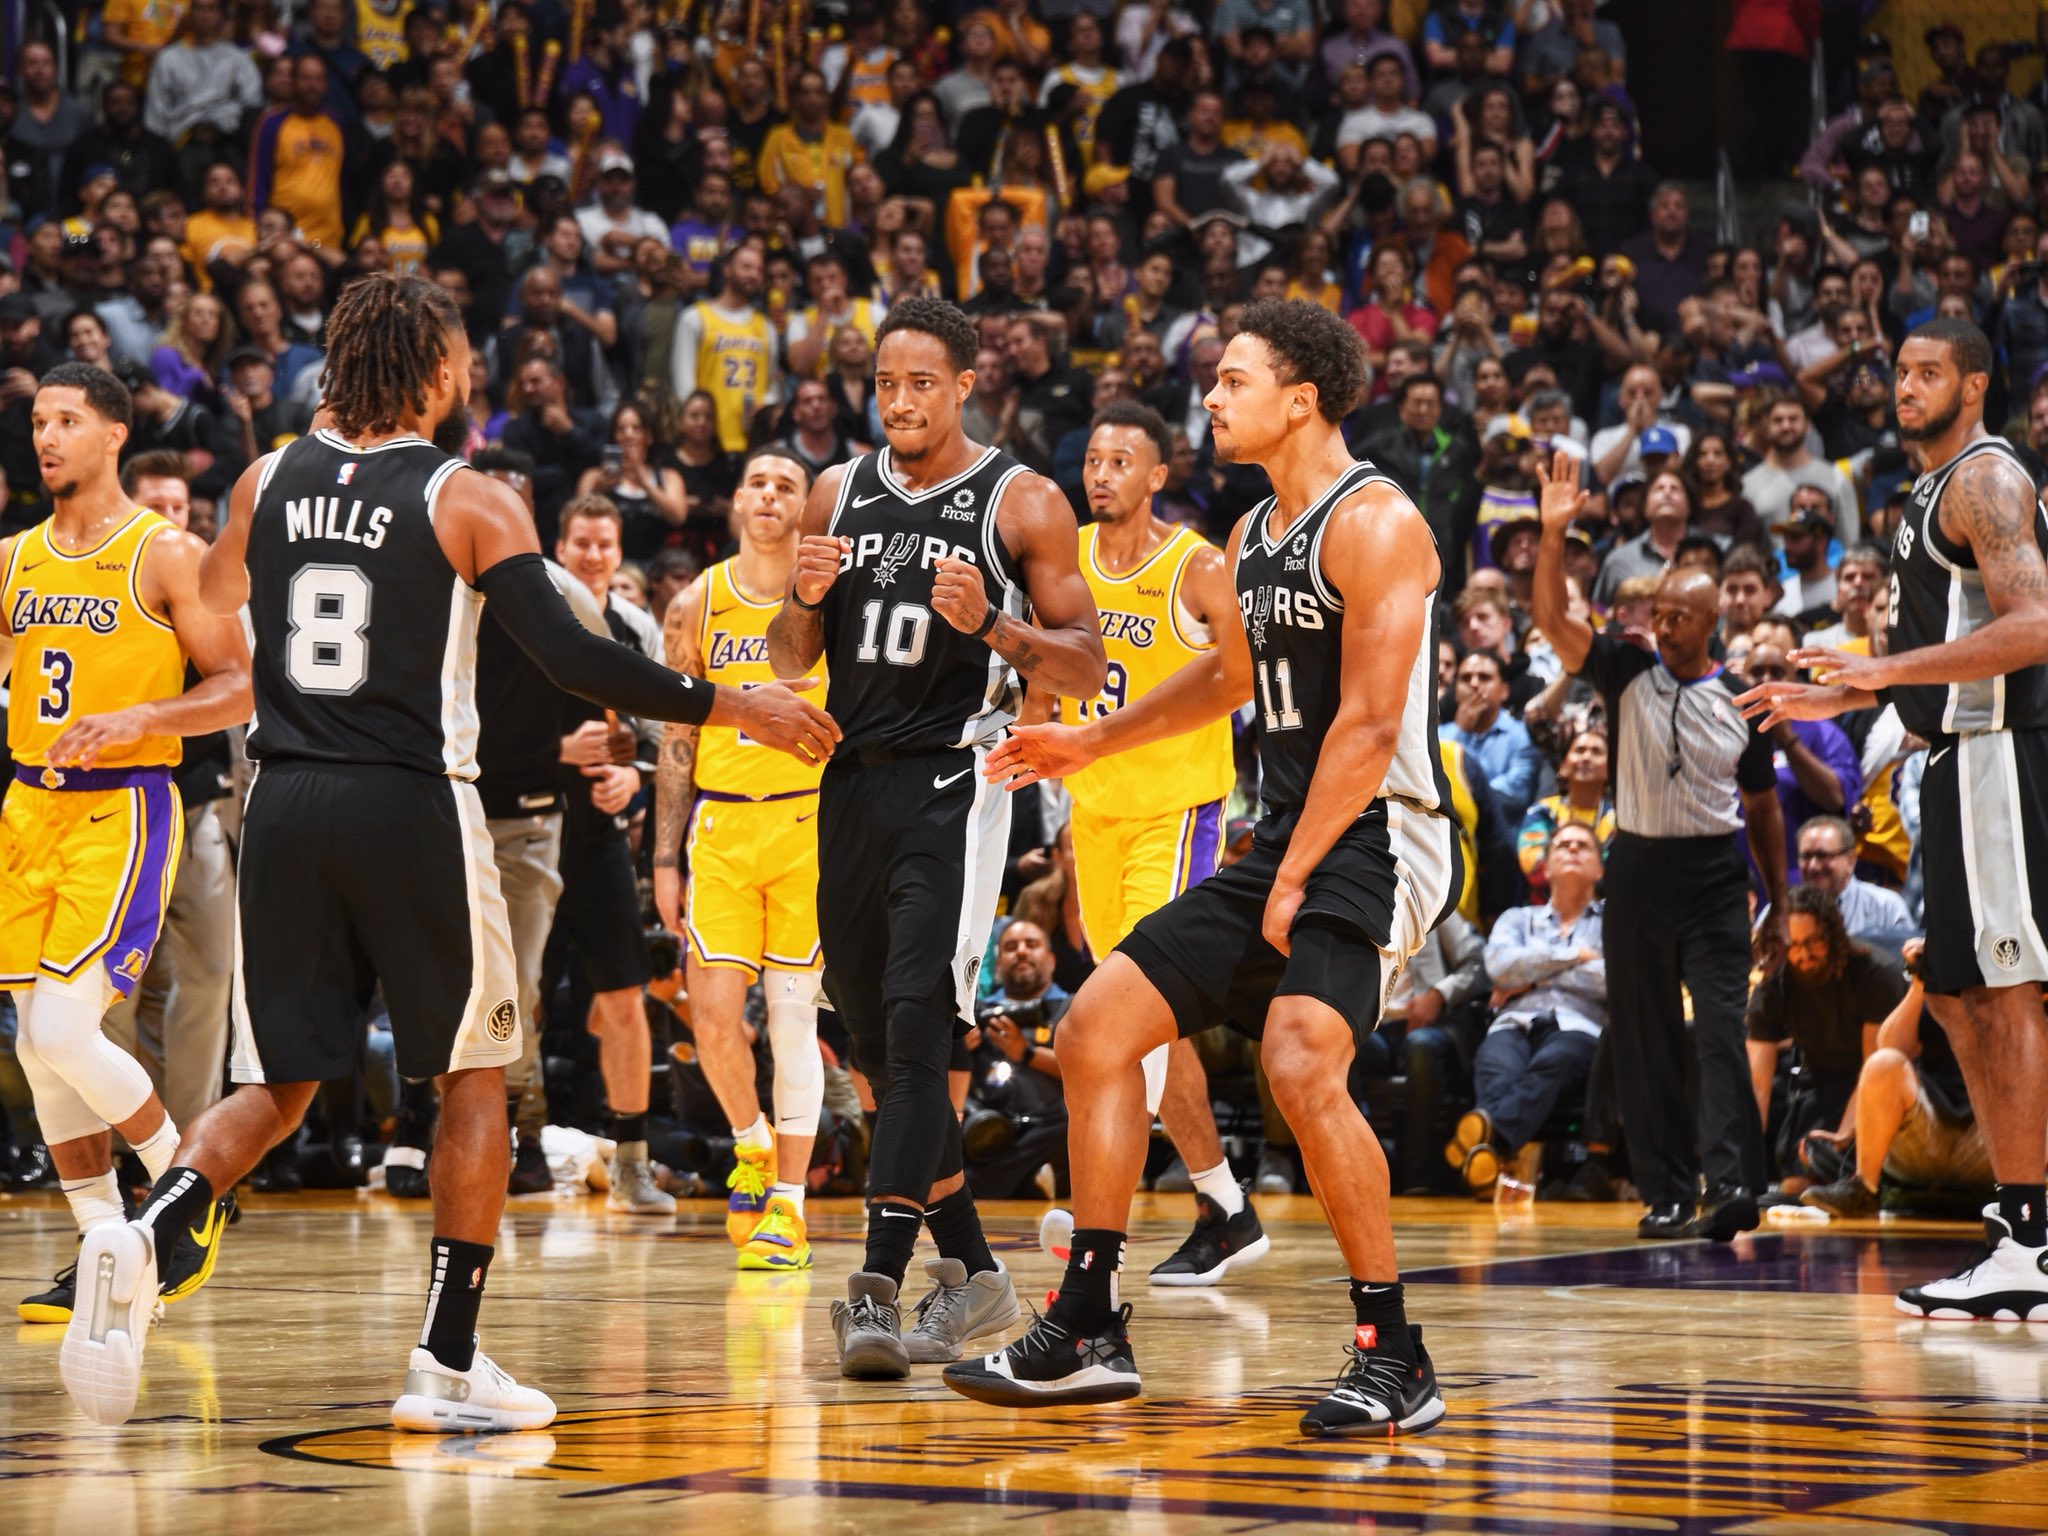 Lakers Lose Overtime Heartbreaker To Spurs 143-142